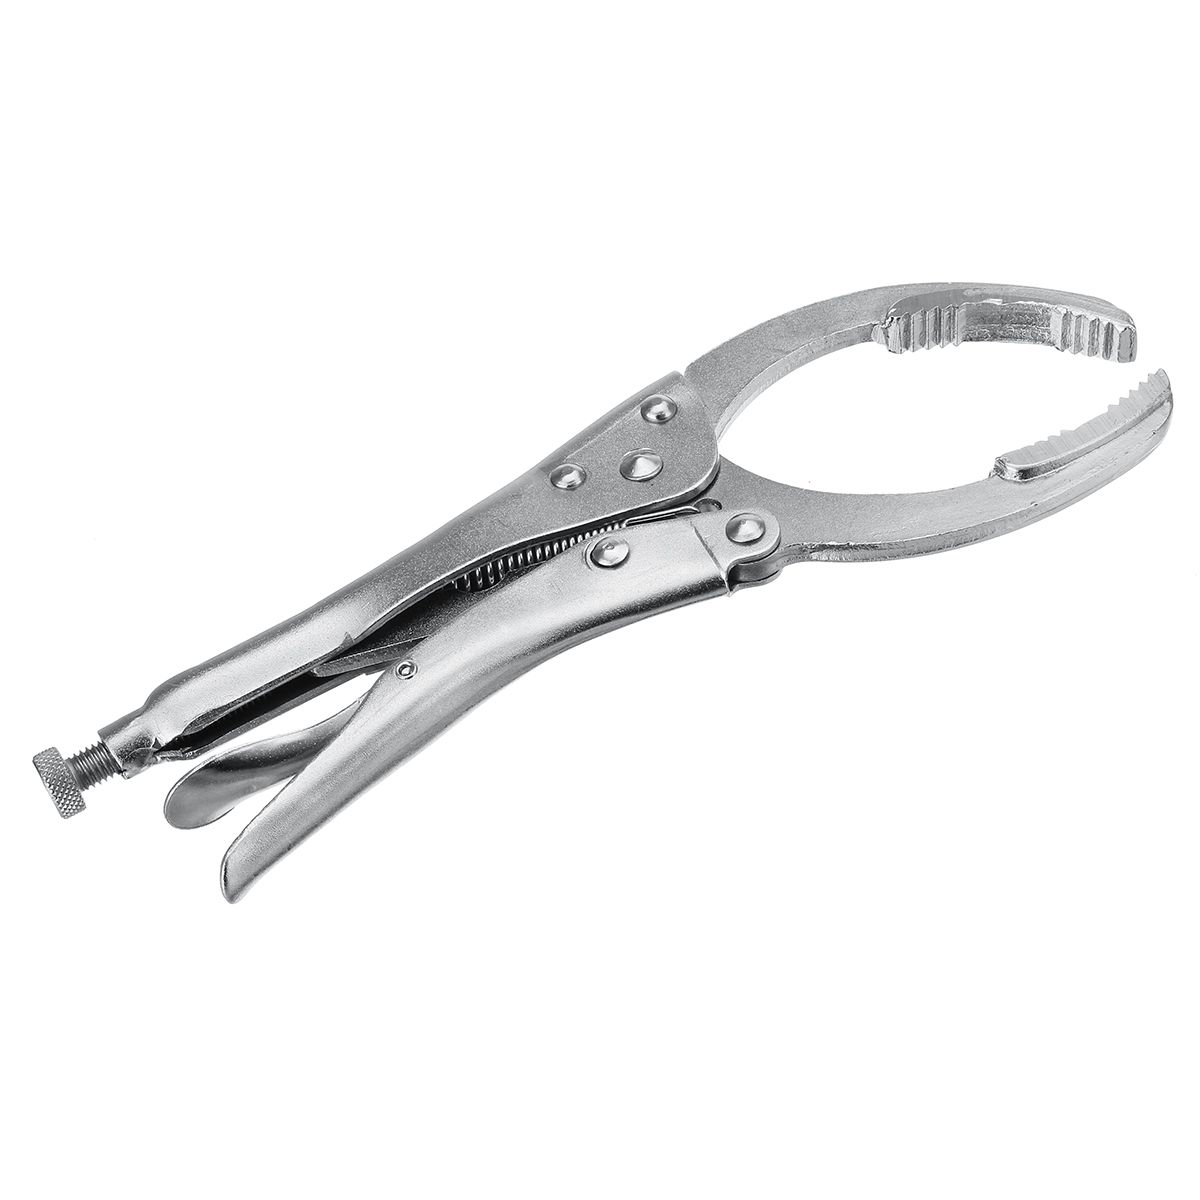 Self-Grip-Oil-Filter-Removal-Tool-Wrench-Pliers-Multi-Purpose-Hand-Remover-Tool-1446280